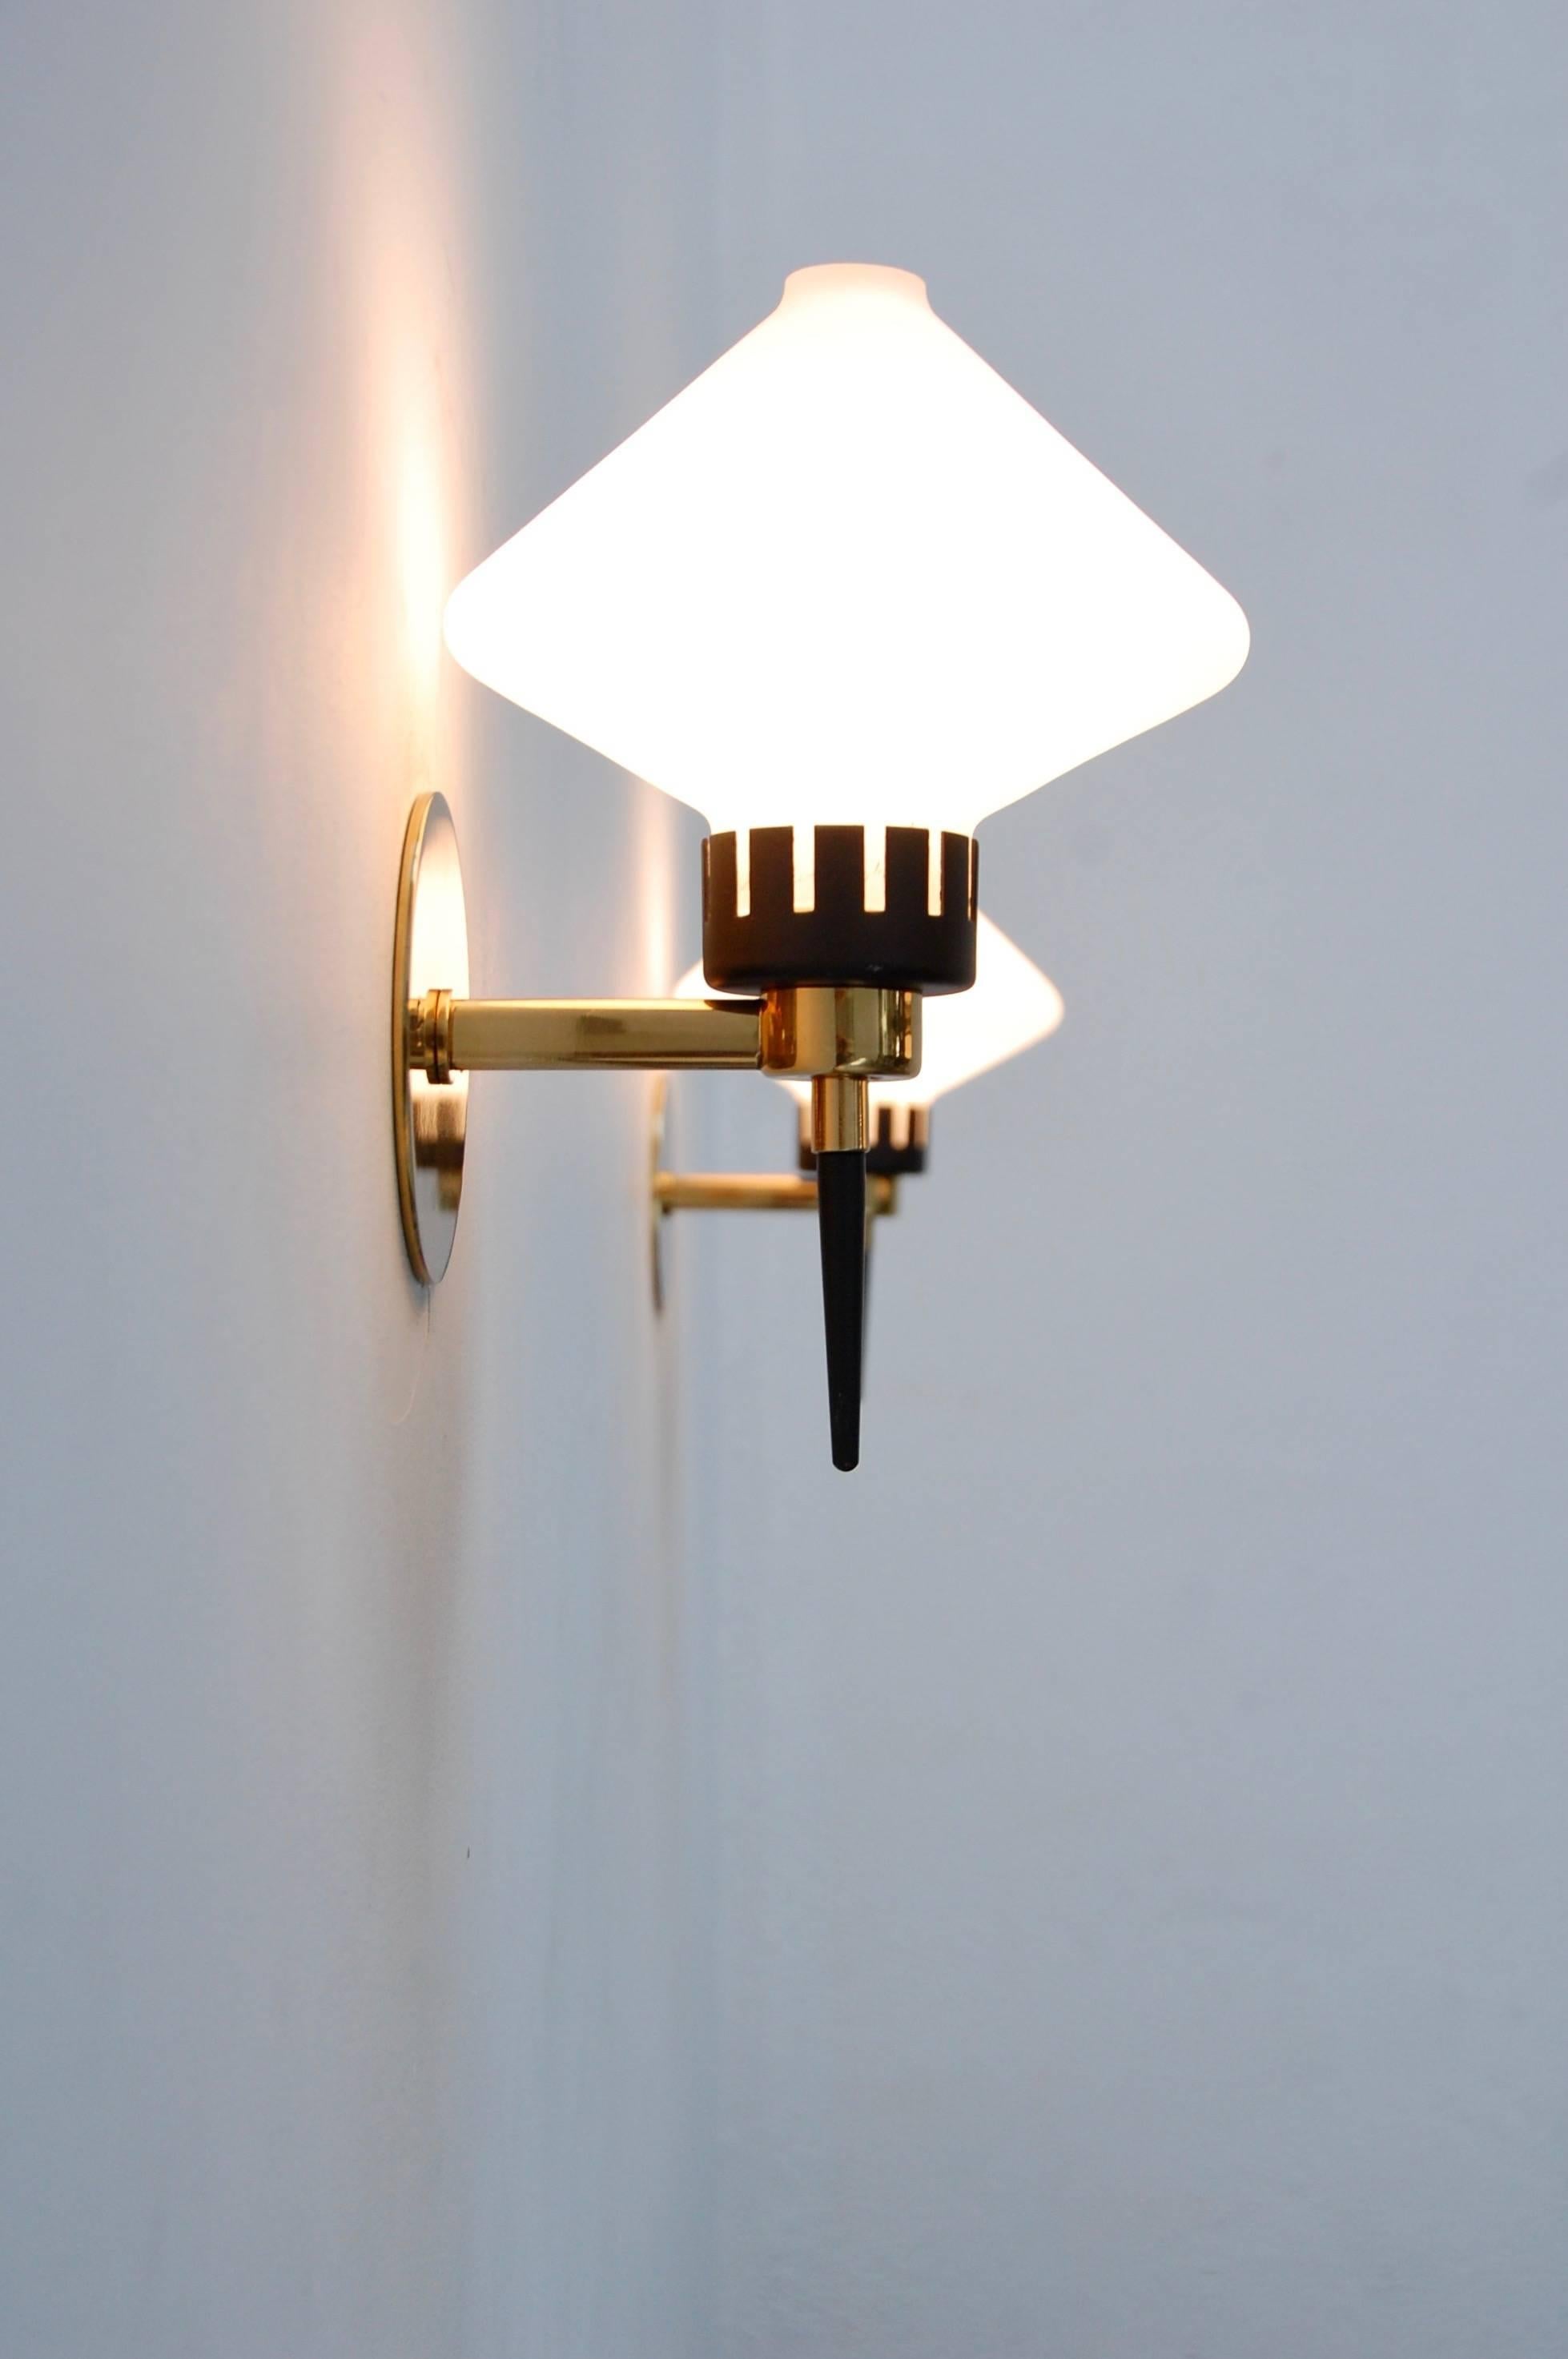 Classic modern sconces from Italy. Single E12 candelabra based socket per sconce, 60 watts max per sconce.